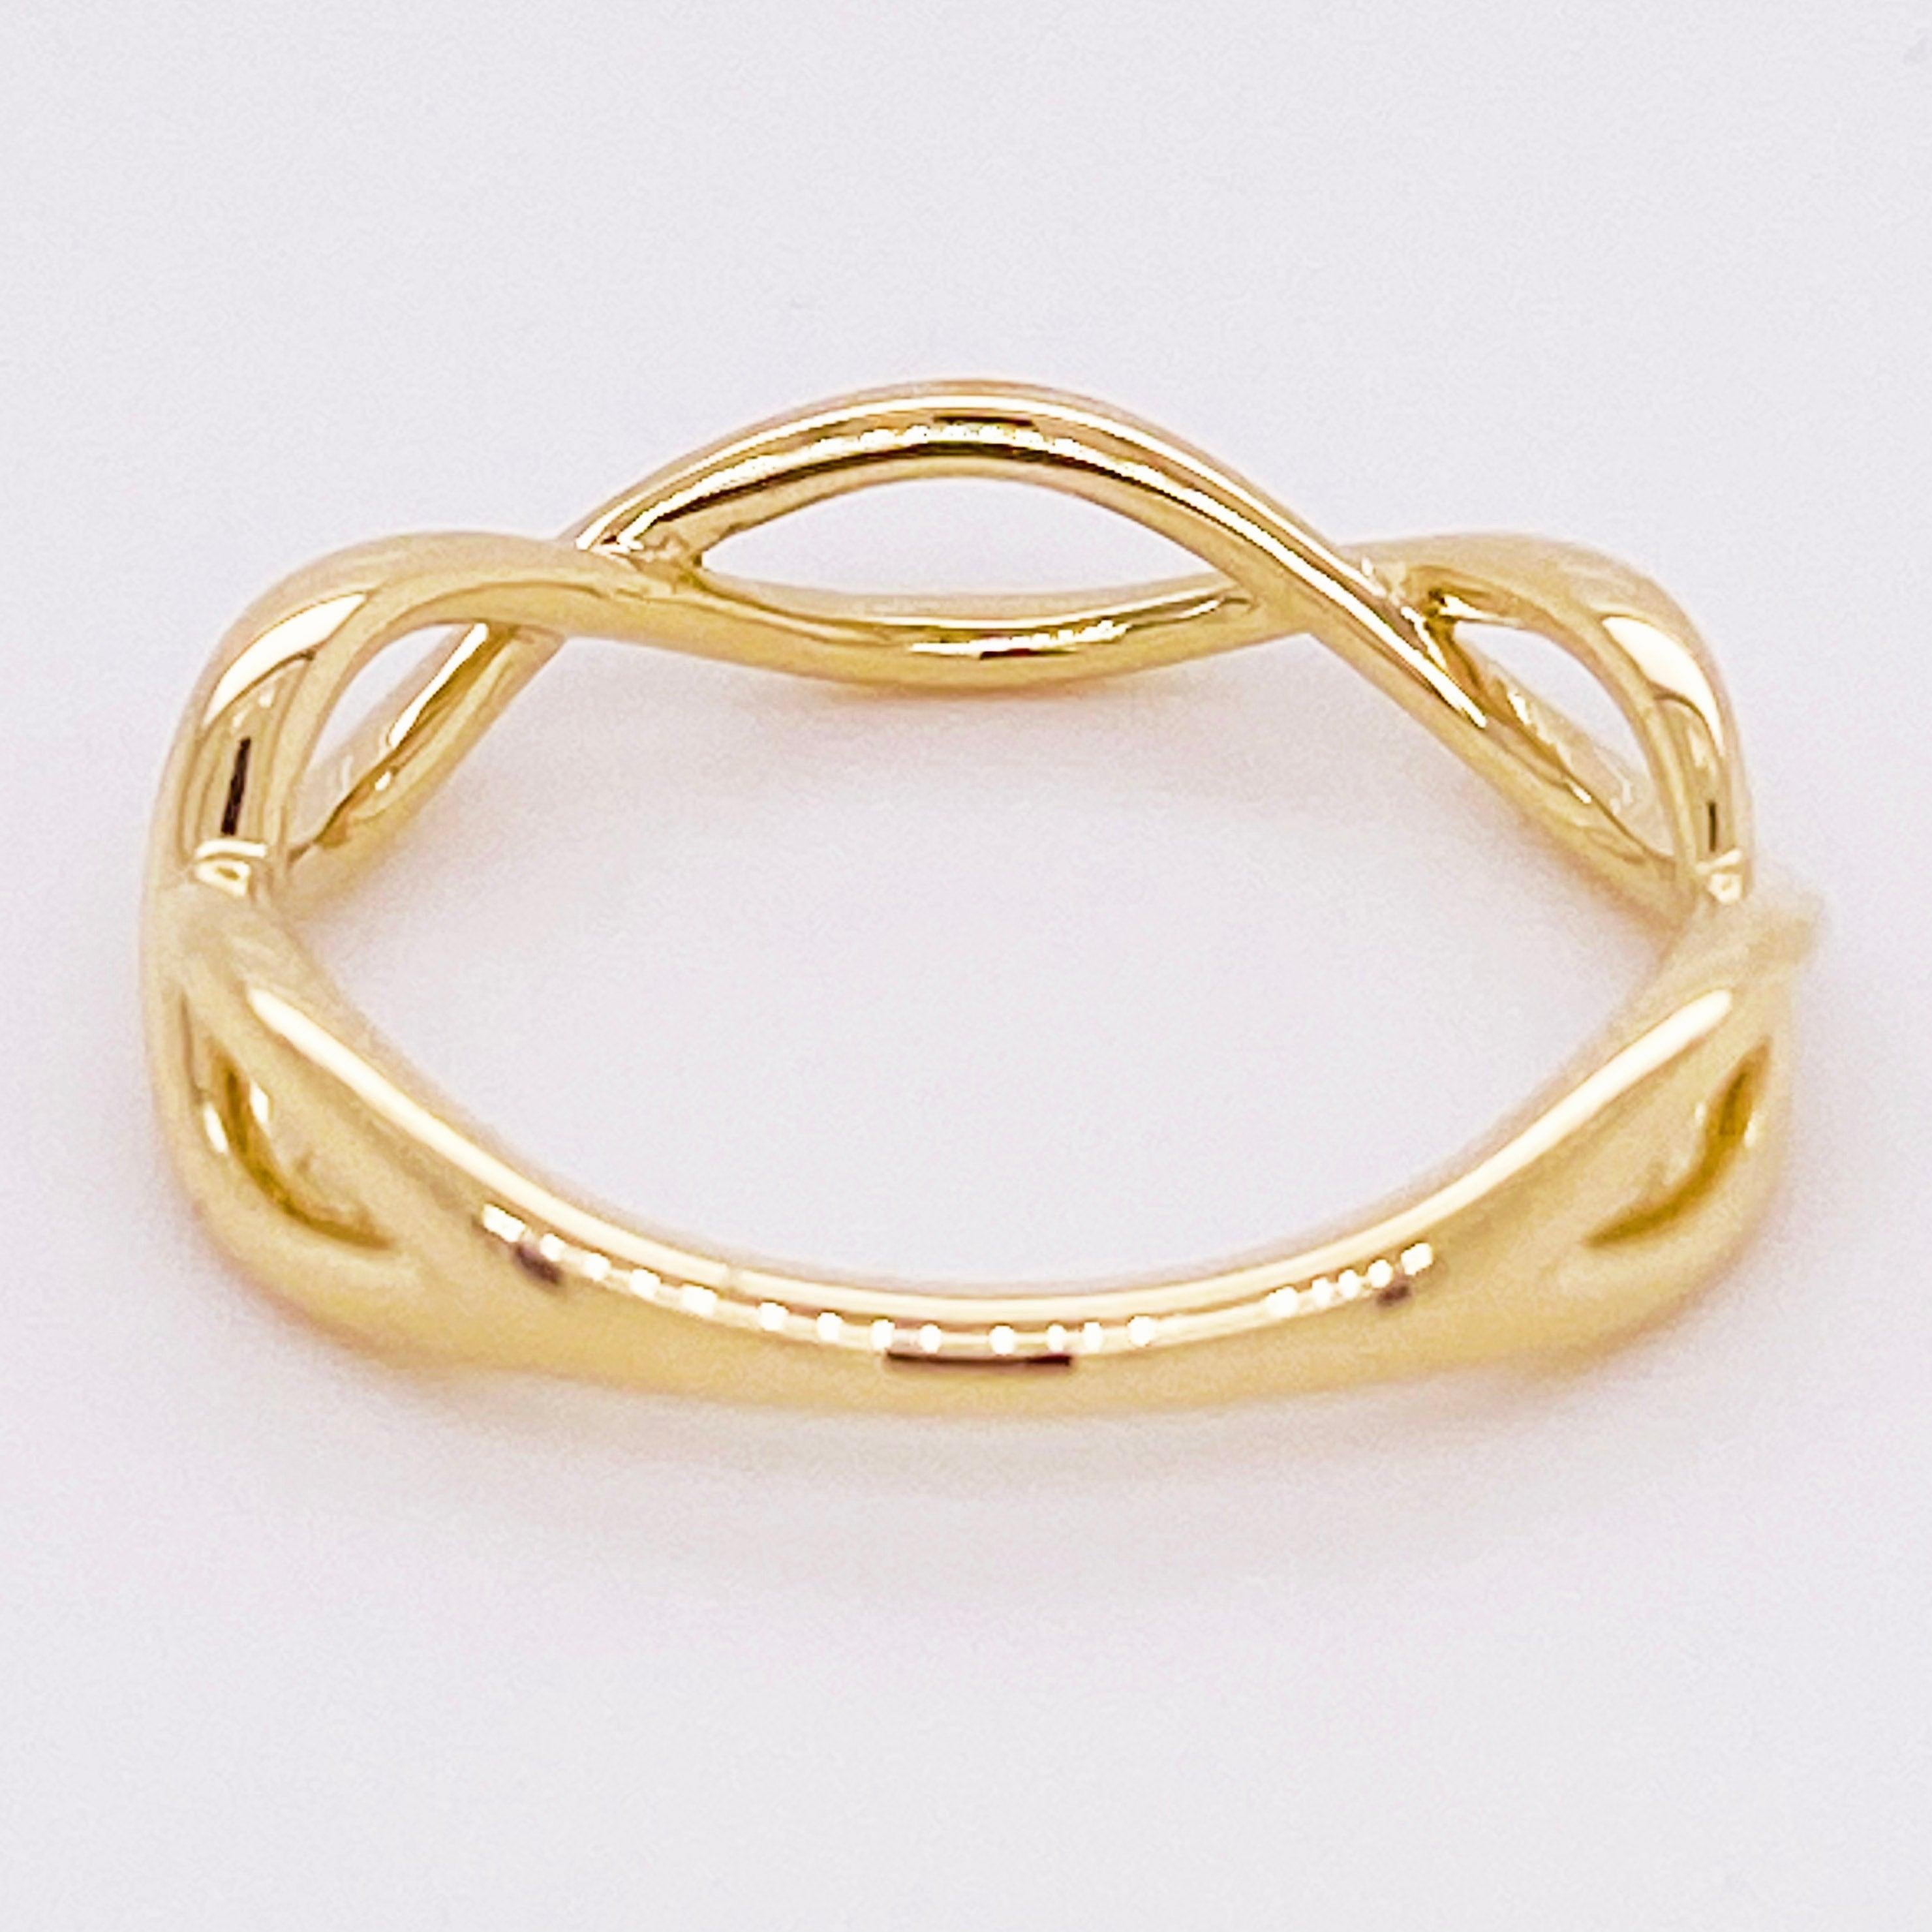 Gold Twisted Ring, 14 Karat Yellow Gold Twisted Stackable Band, LR51926Y4JJJ 5